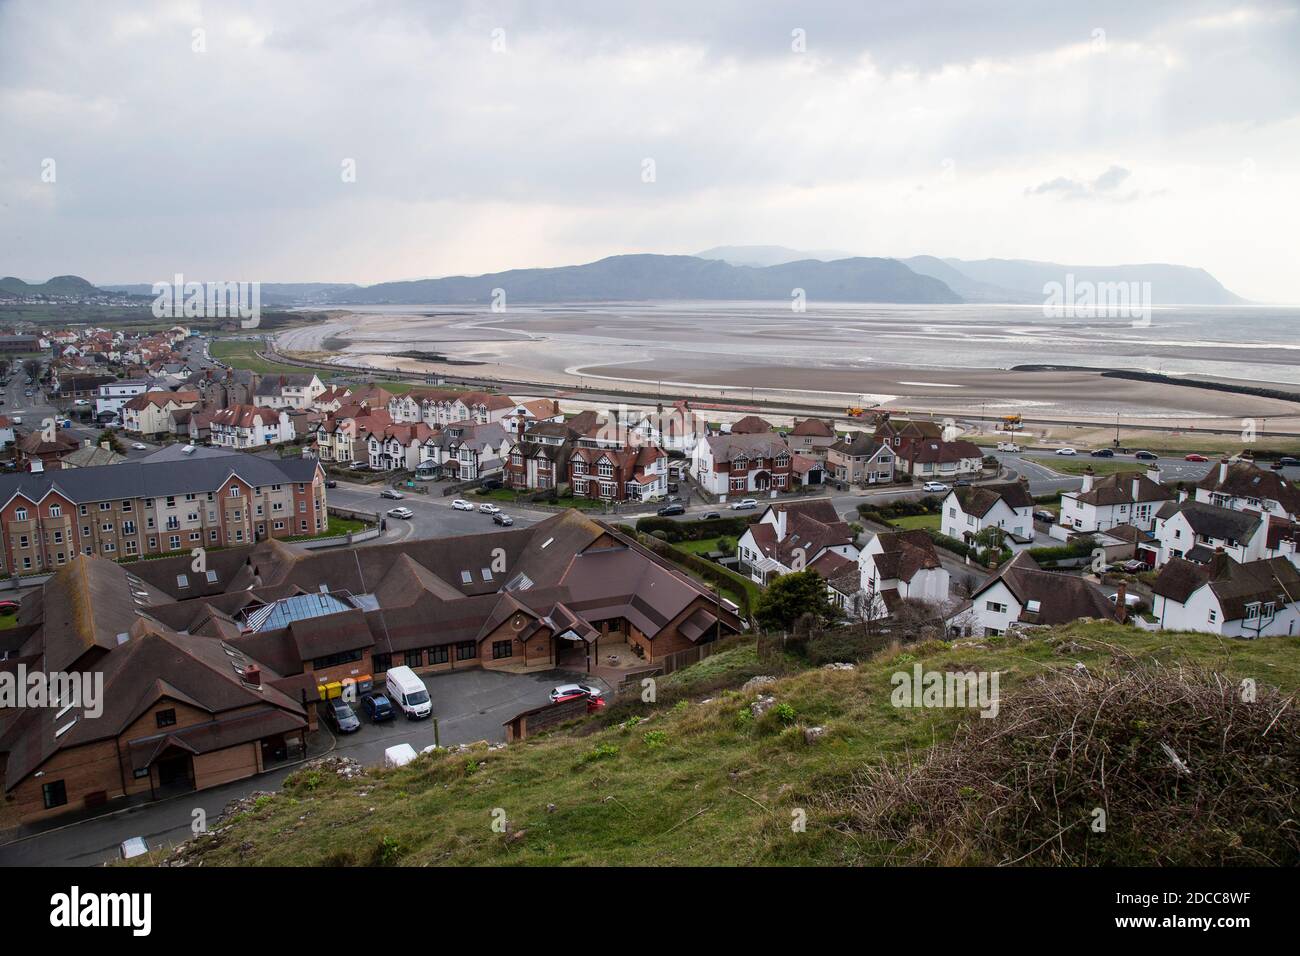 A view from the Great Orme of Llandudno West shore, Deganwy, Conwy estuary, Penmaenmawr and Snowdonia beyond in North Wales, U.K. Stock Photo